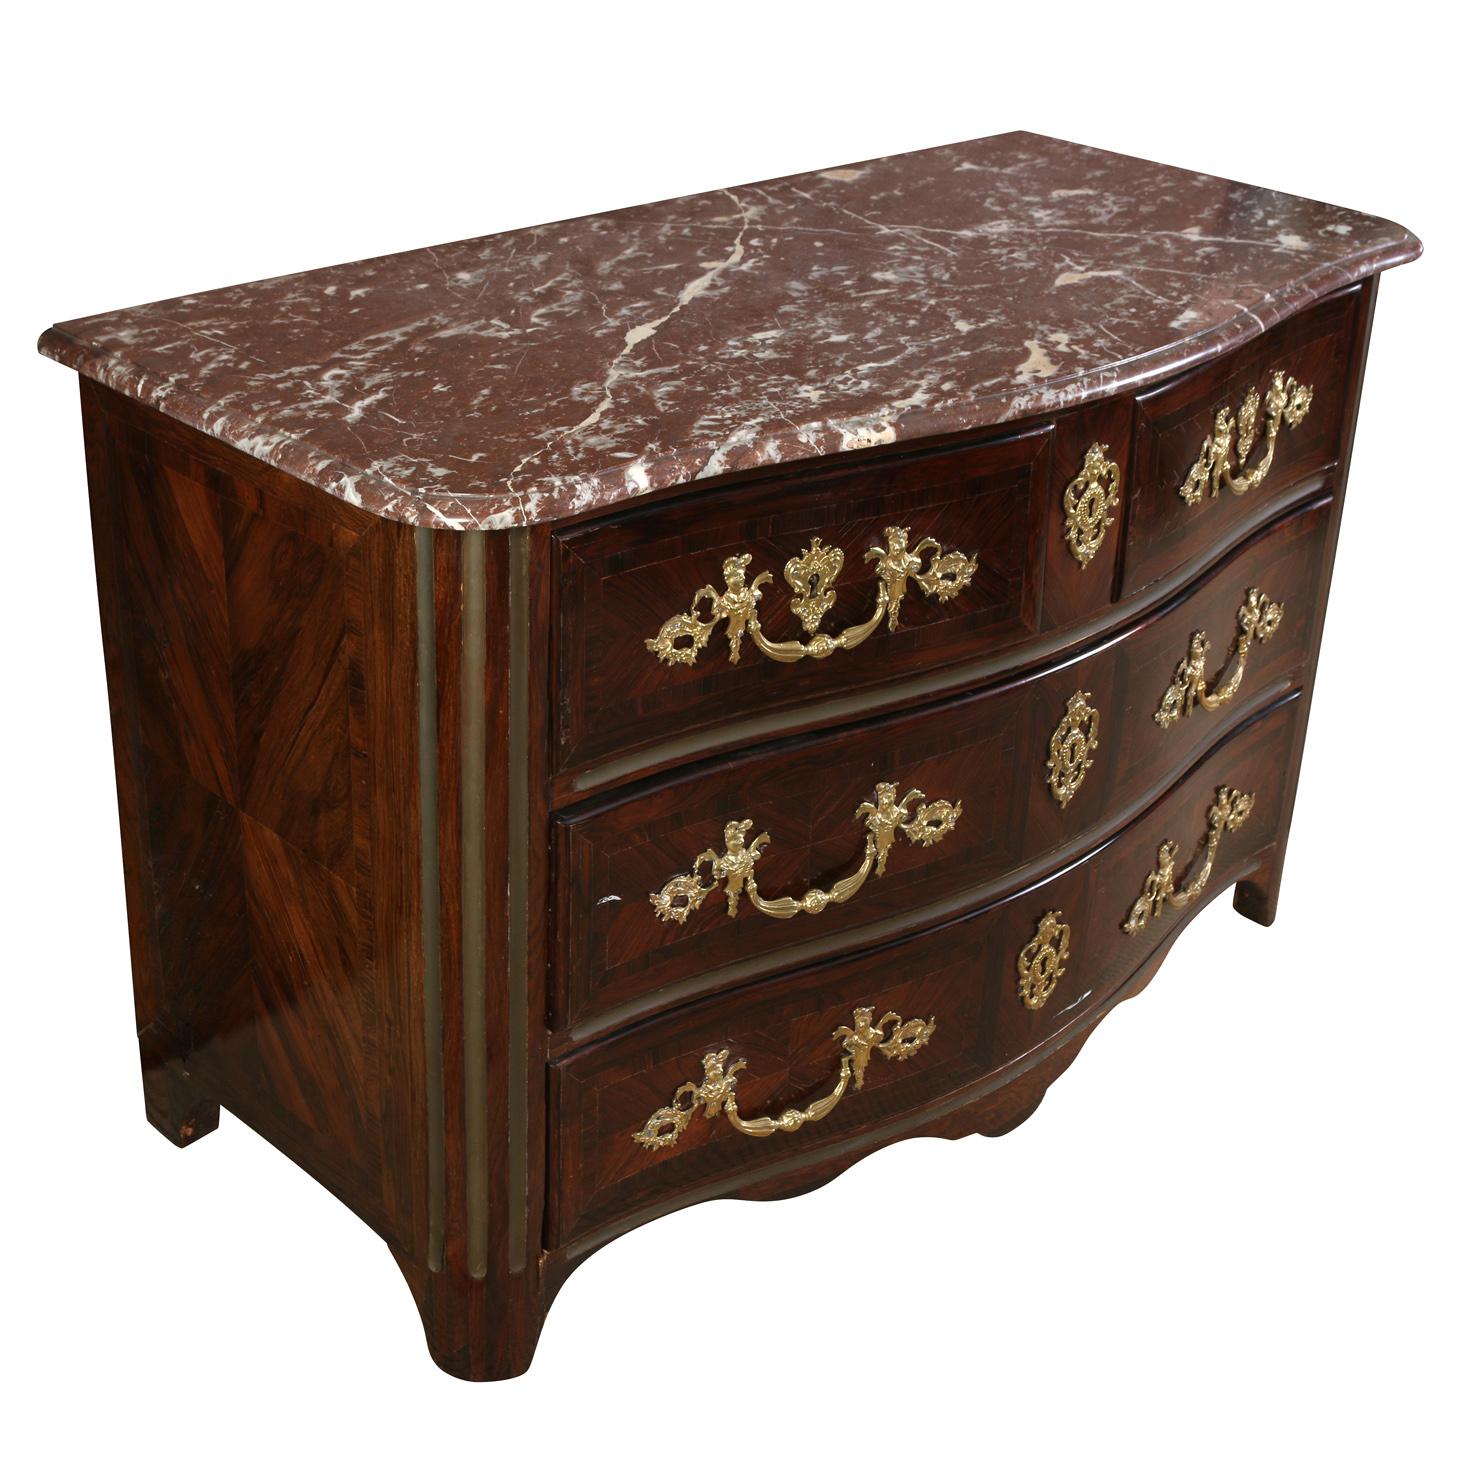 Regence style, brass and ormolu mount commode with serpentine shape front and Spanish rouge marble top. Drawers are fabric lined.